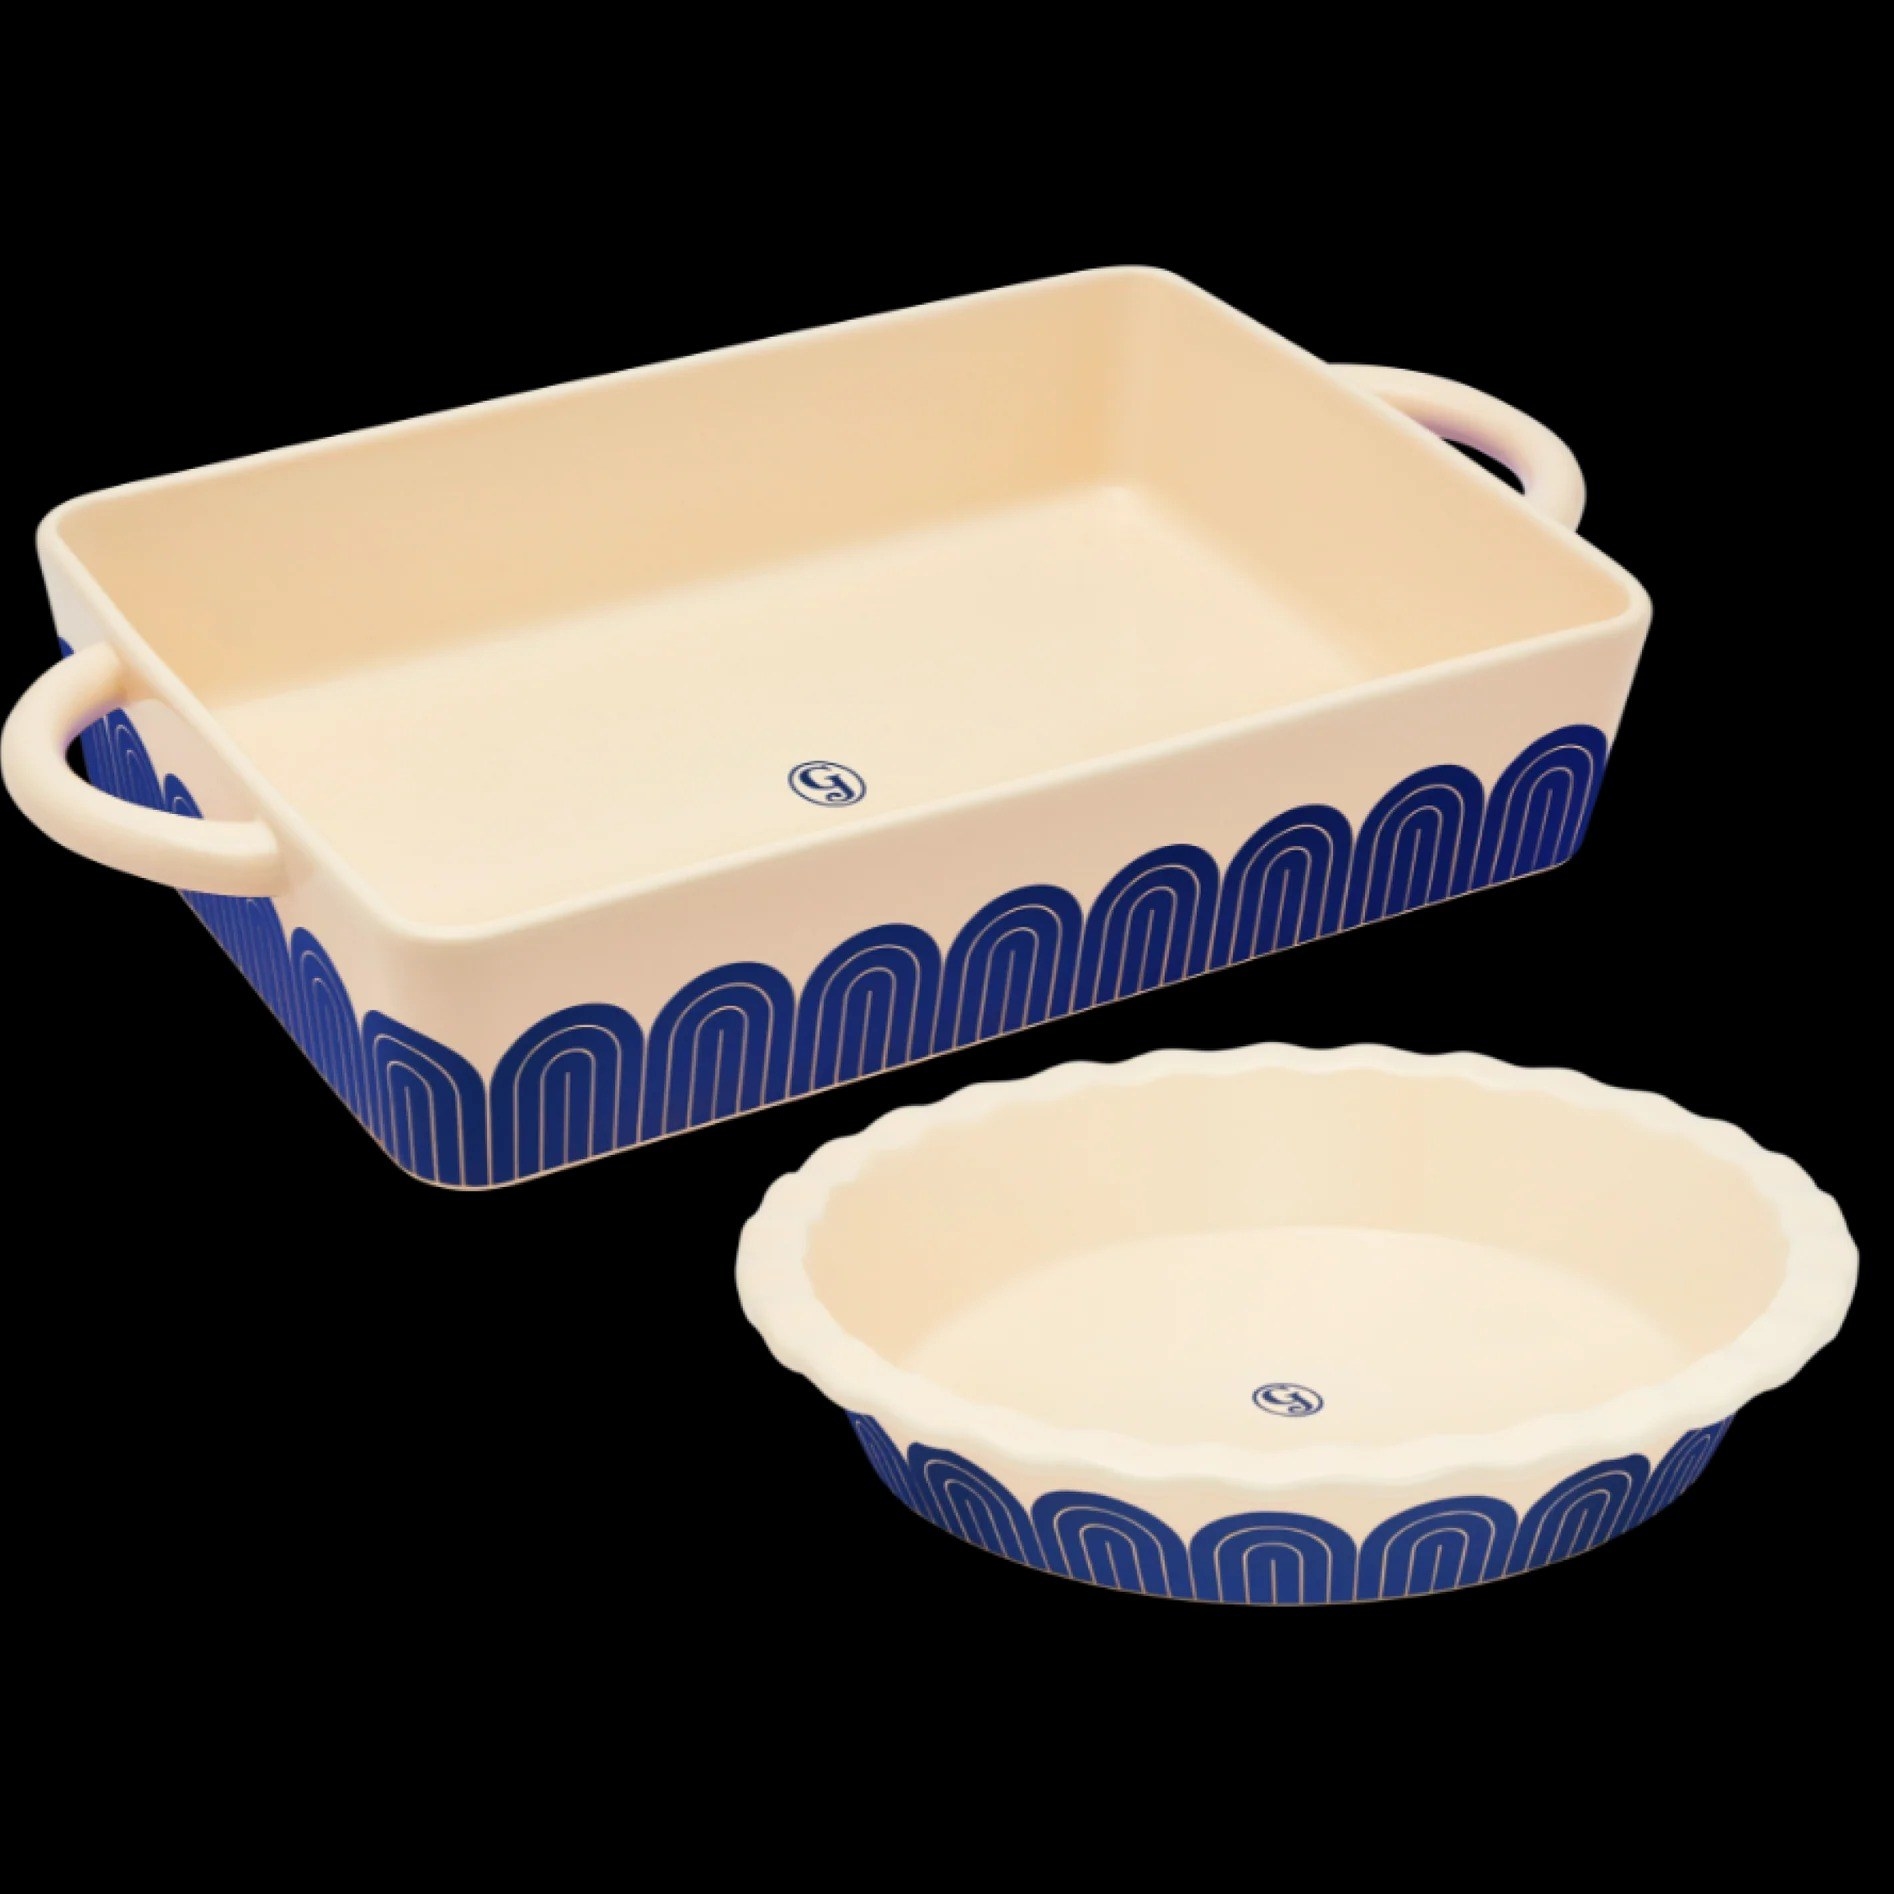 9-by-13-inch casserole dish and round pie dish with blue geometric pattern on them